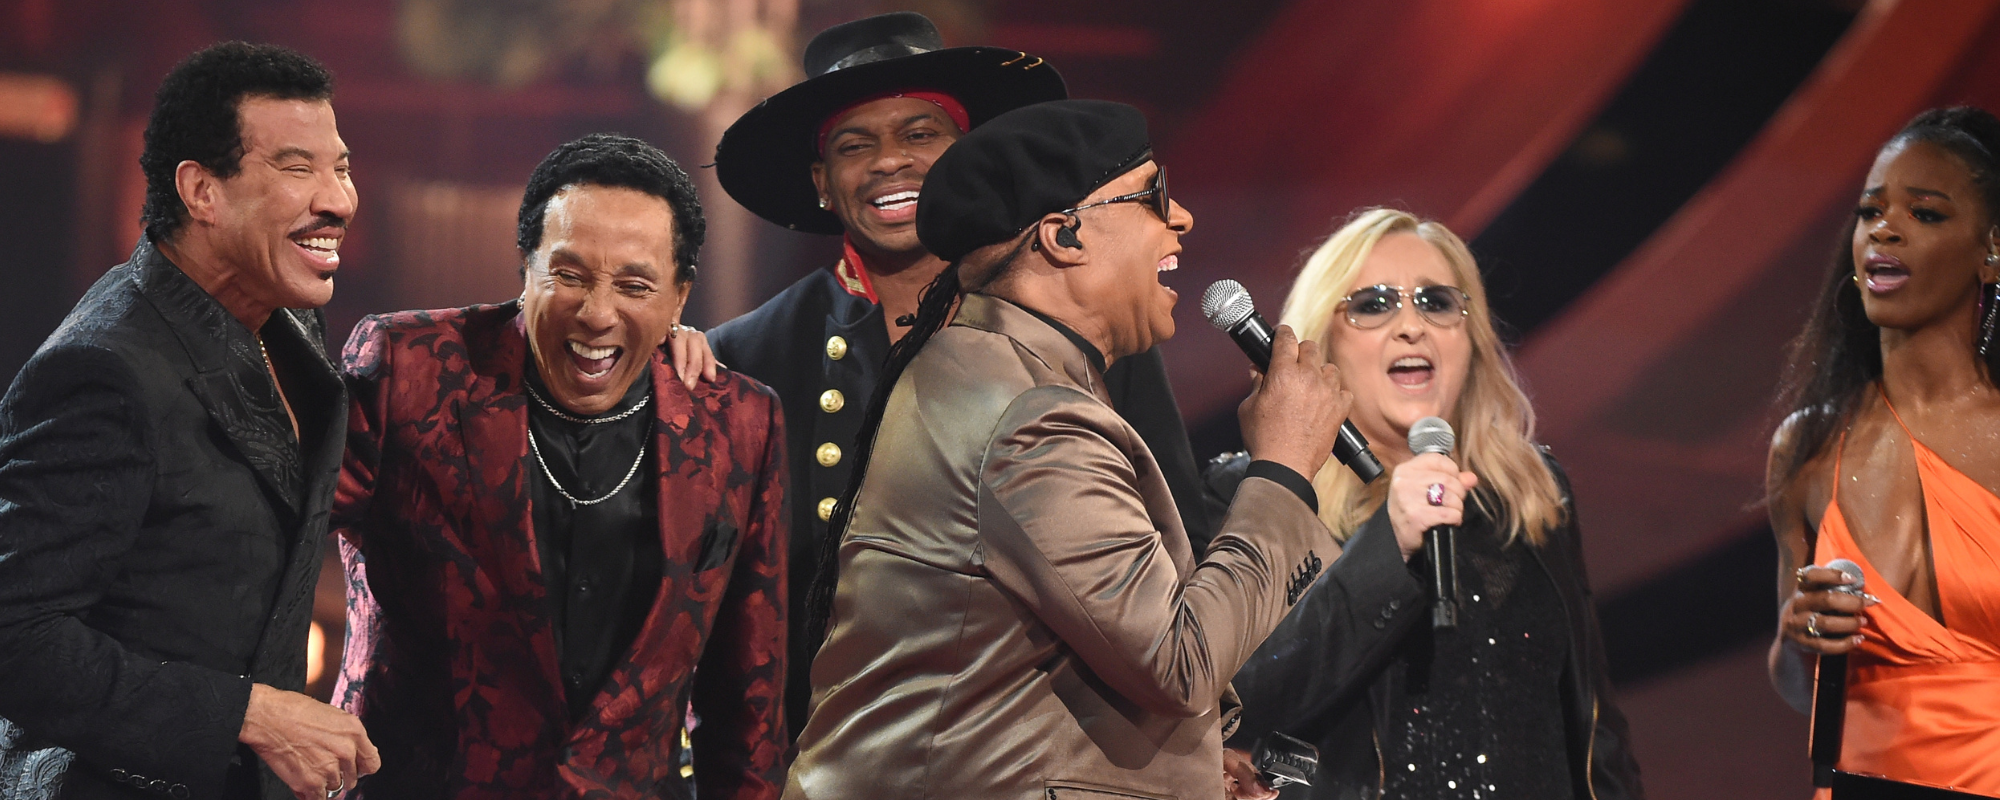 Stevie Wonder, Charlie Puth and Ari Lennox Honor Lionel Richie at the AMAs